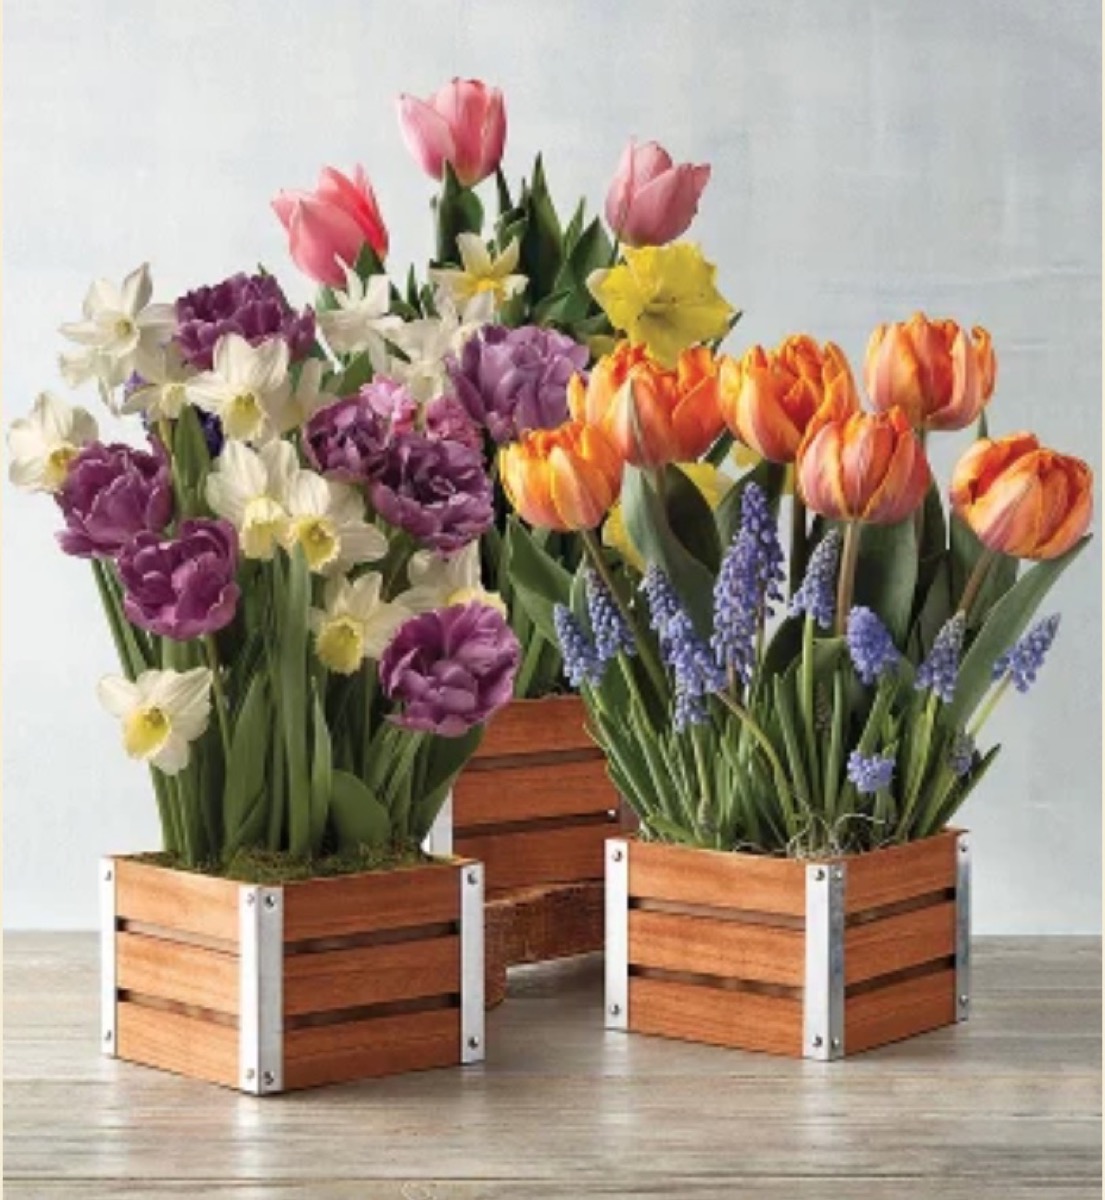 three wooden crates of colorful flowers on granite counter